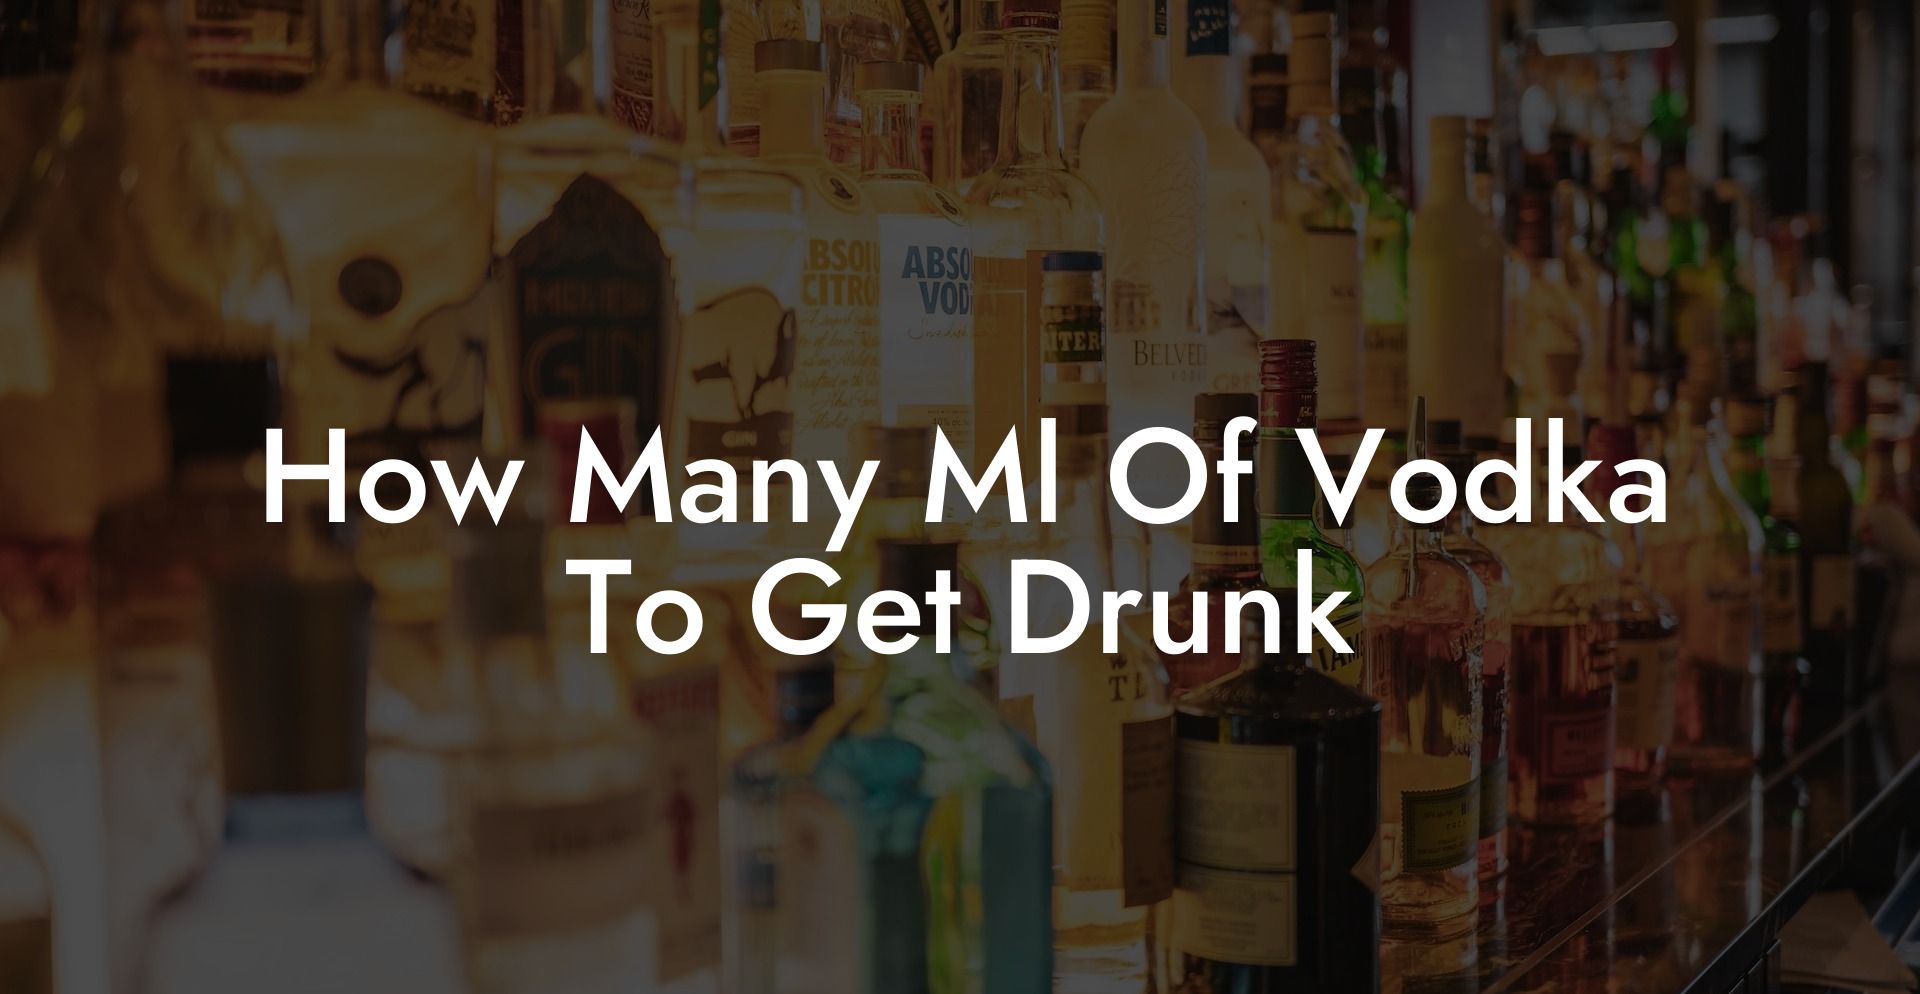 How Many Ml Of Vodka To Get Drunk